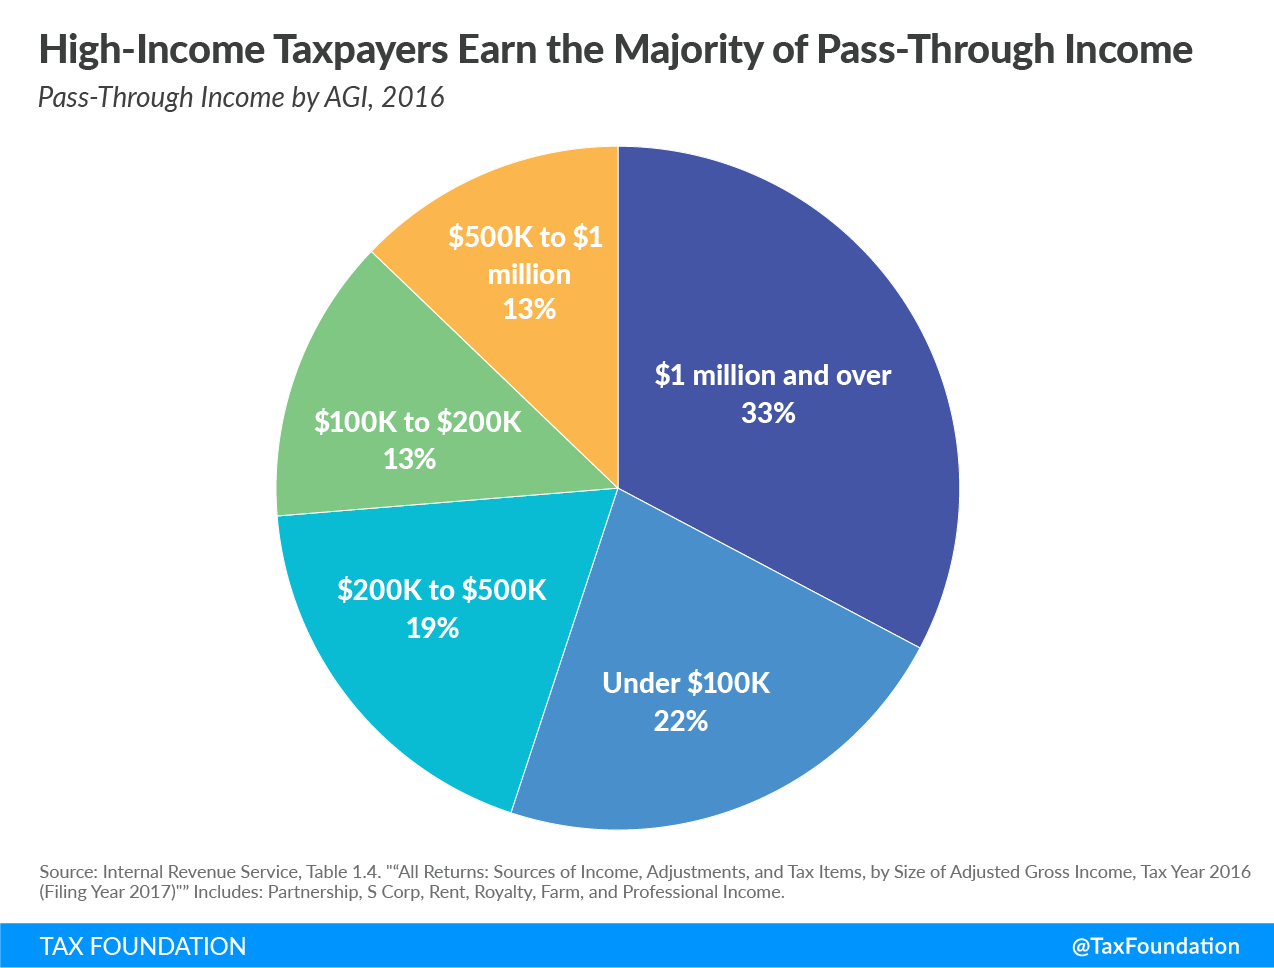 High-income taxpayers earn the majority of pass-through income pass-through business pass-through businesses